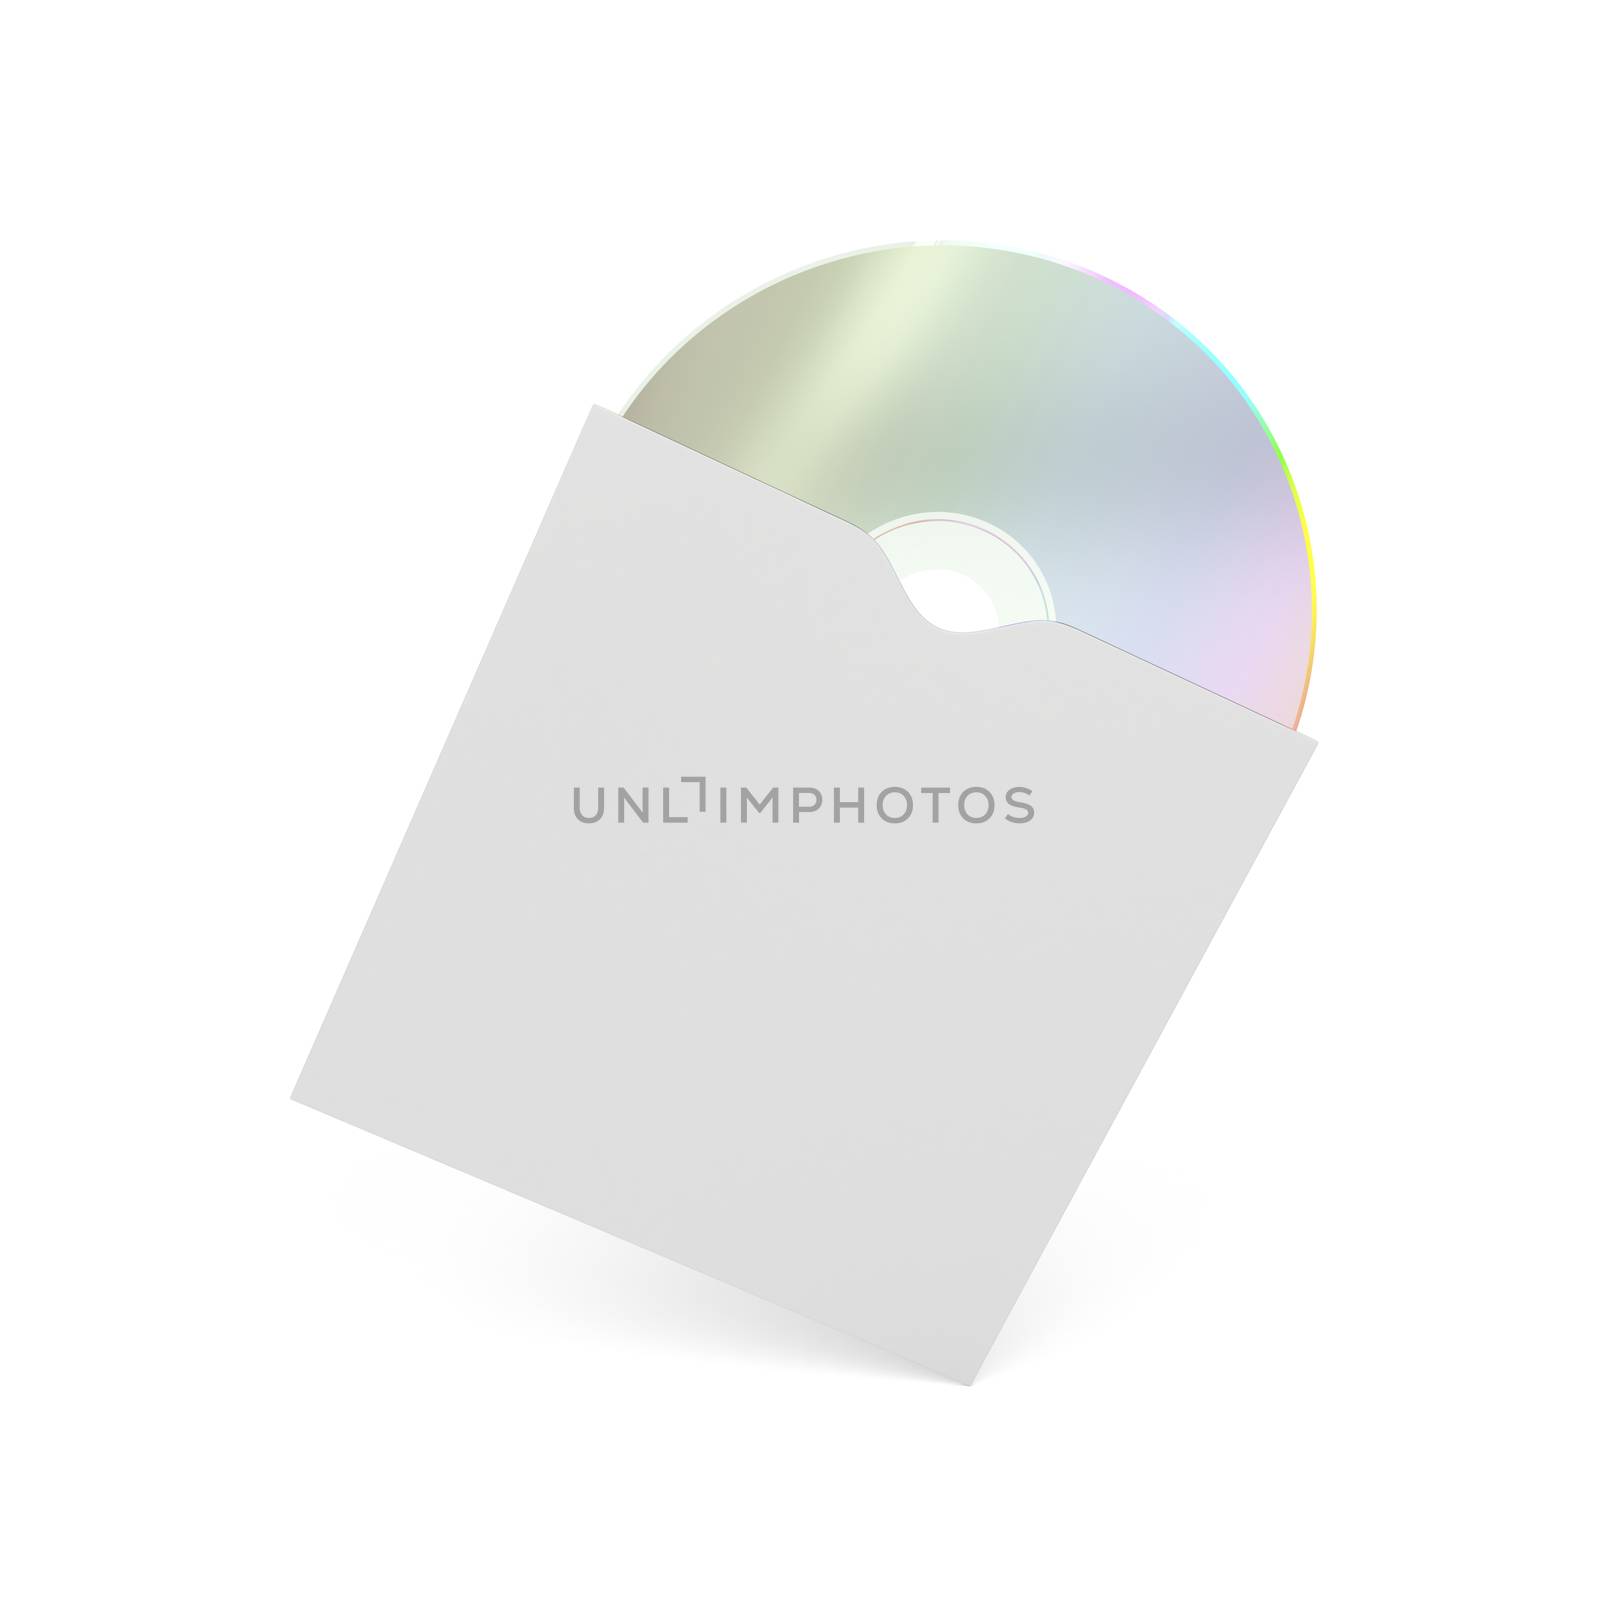 Compact disc by magraphics